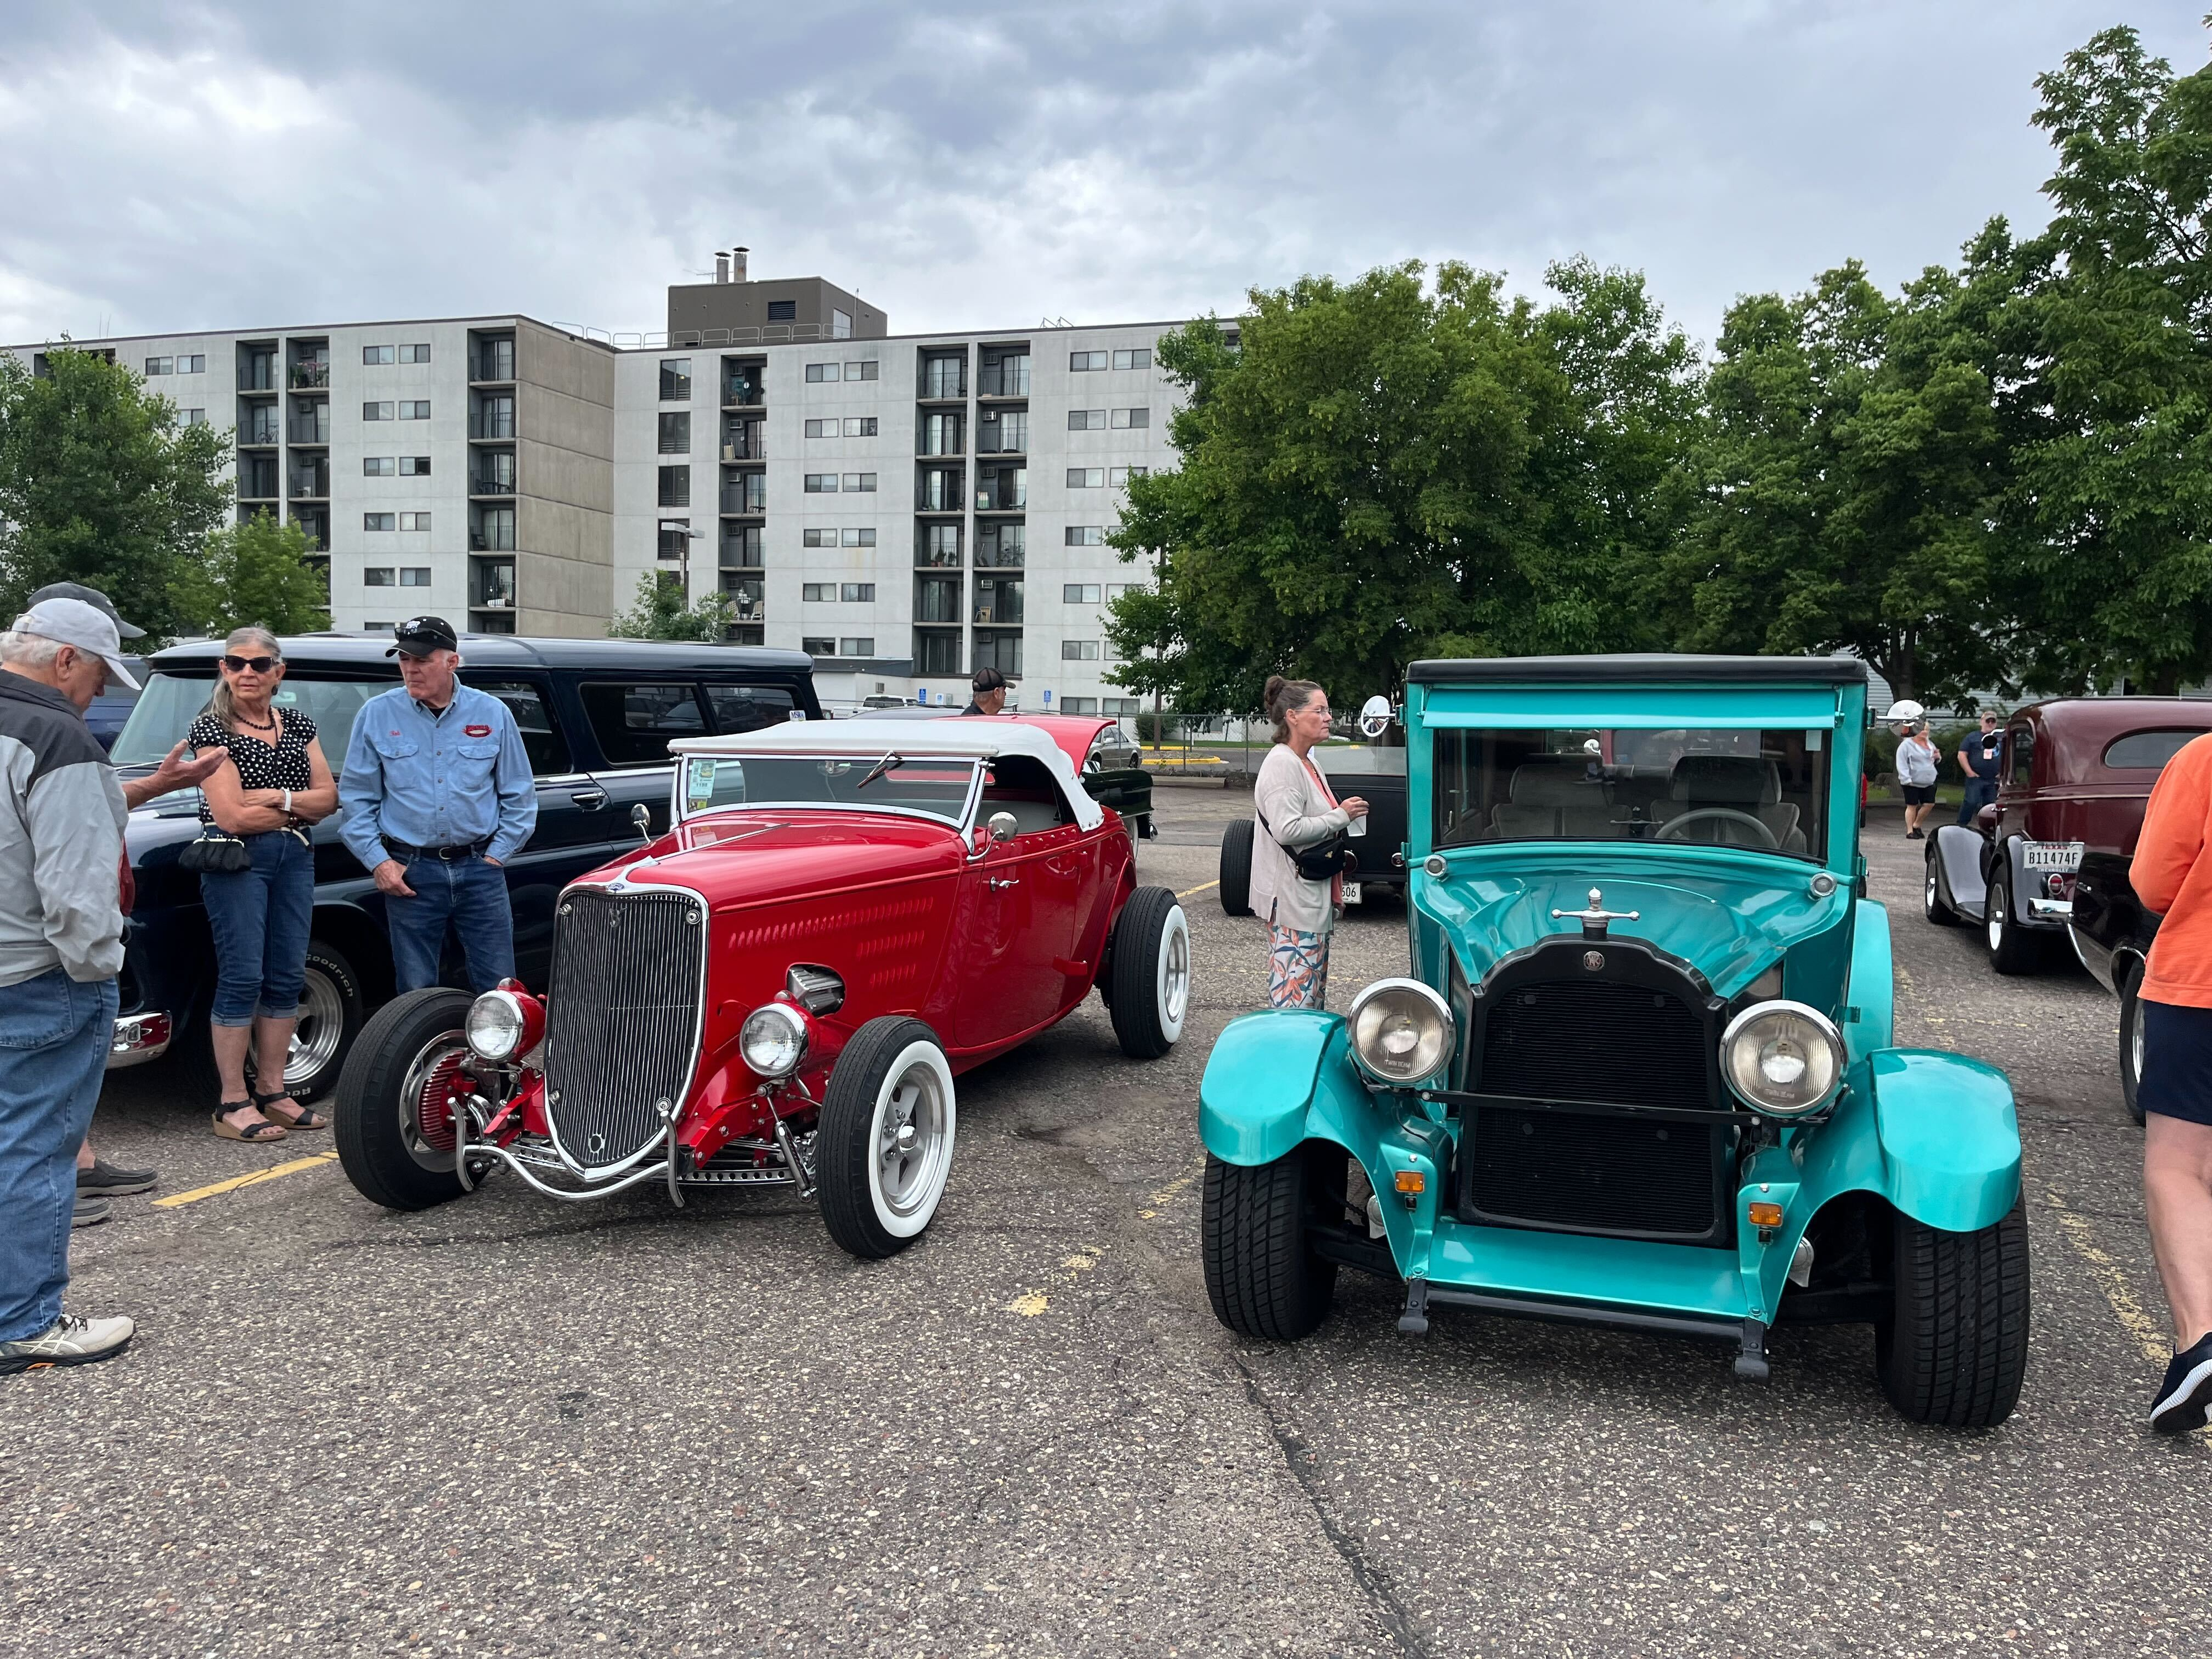 It's the 50th year of the Street Rod Association's Back to the 50's Weekend in Minnesota..and its expected to be bigger and better than ever.